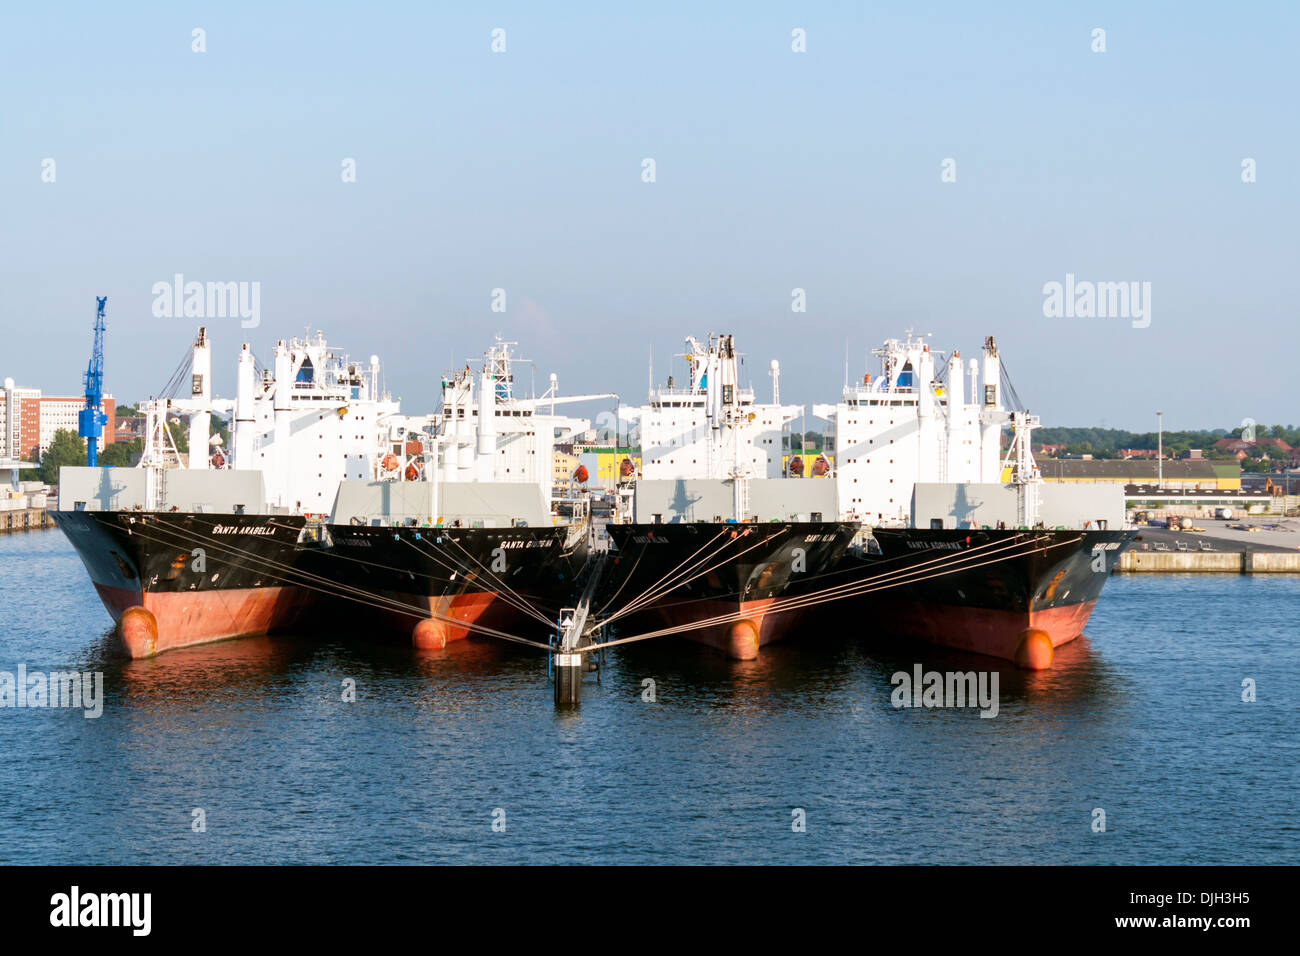 Bulk Carriers Tied Up at the Port of Kiel, Germany Stock Photo